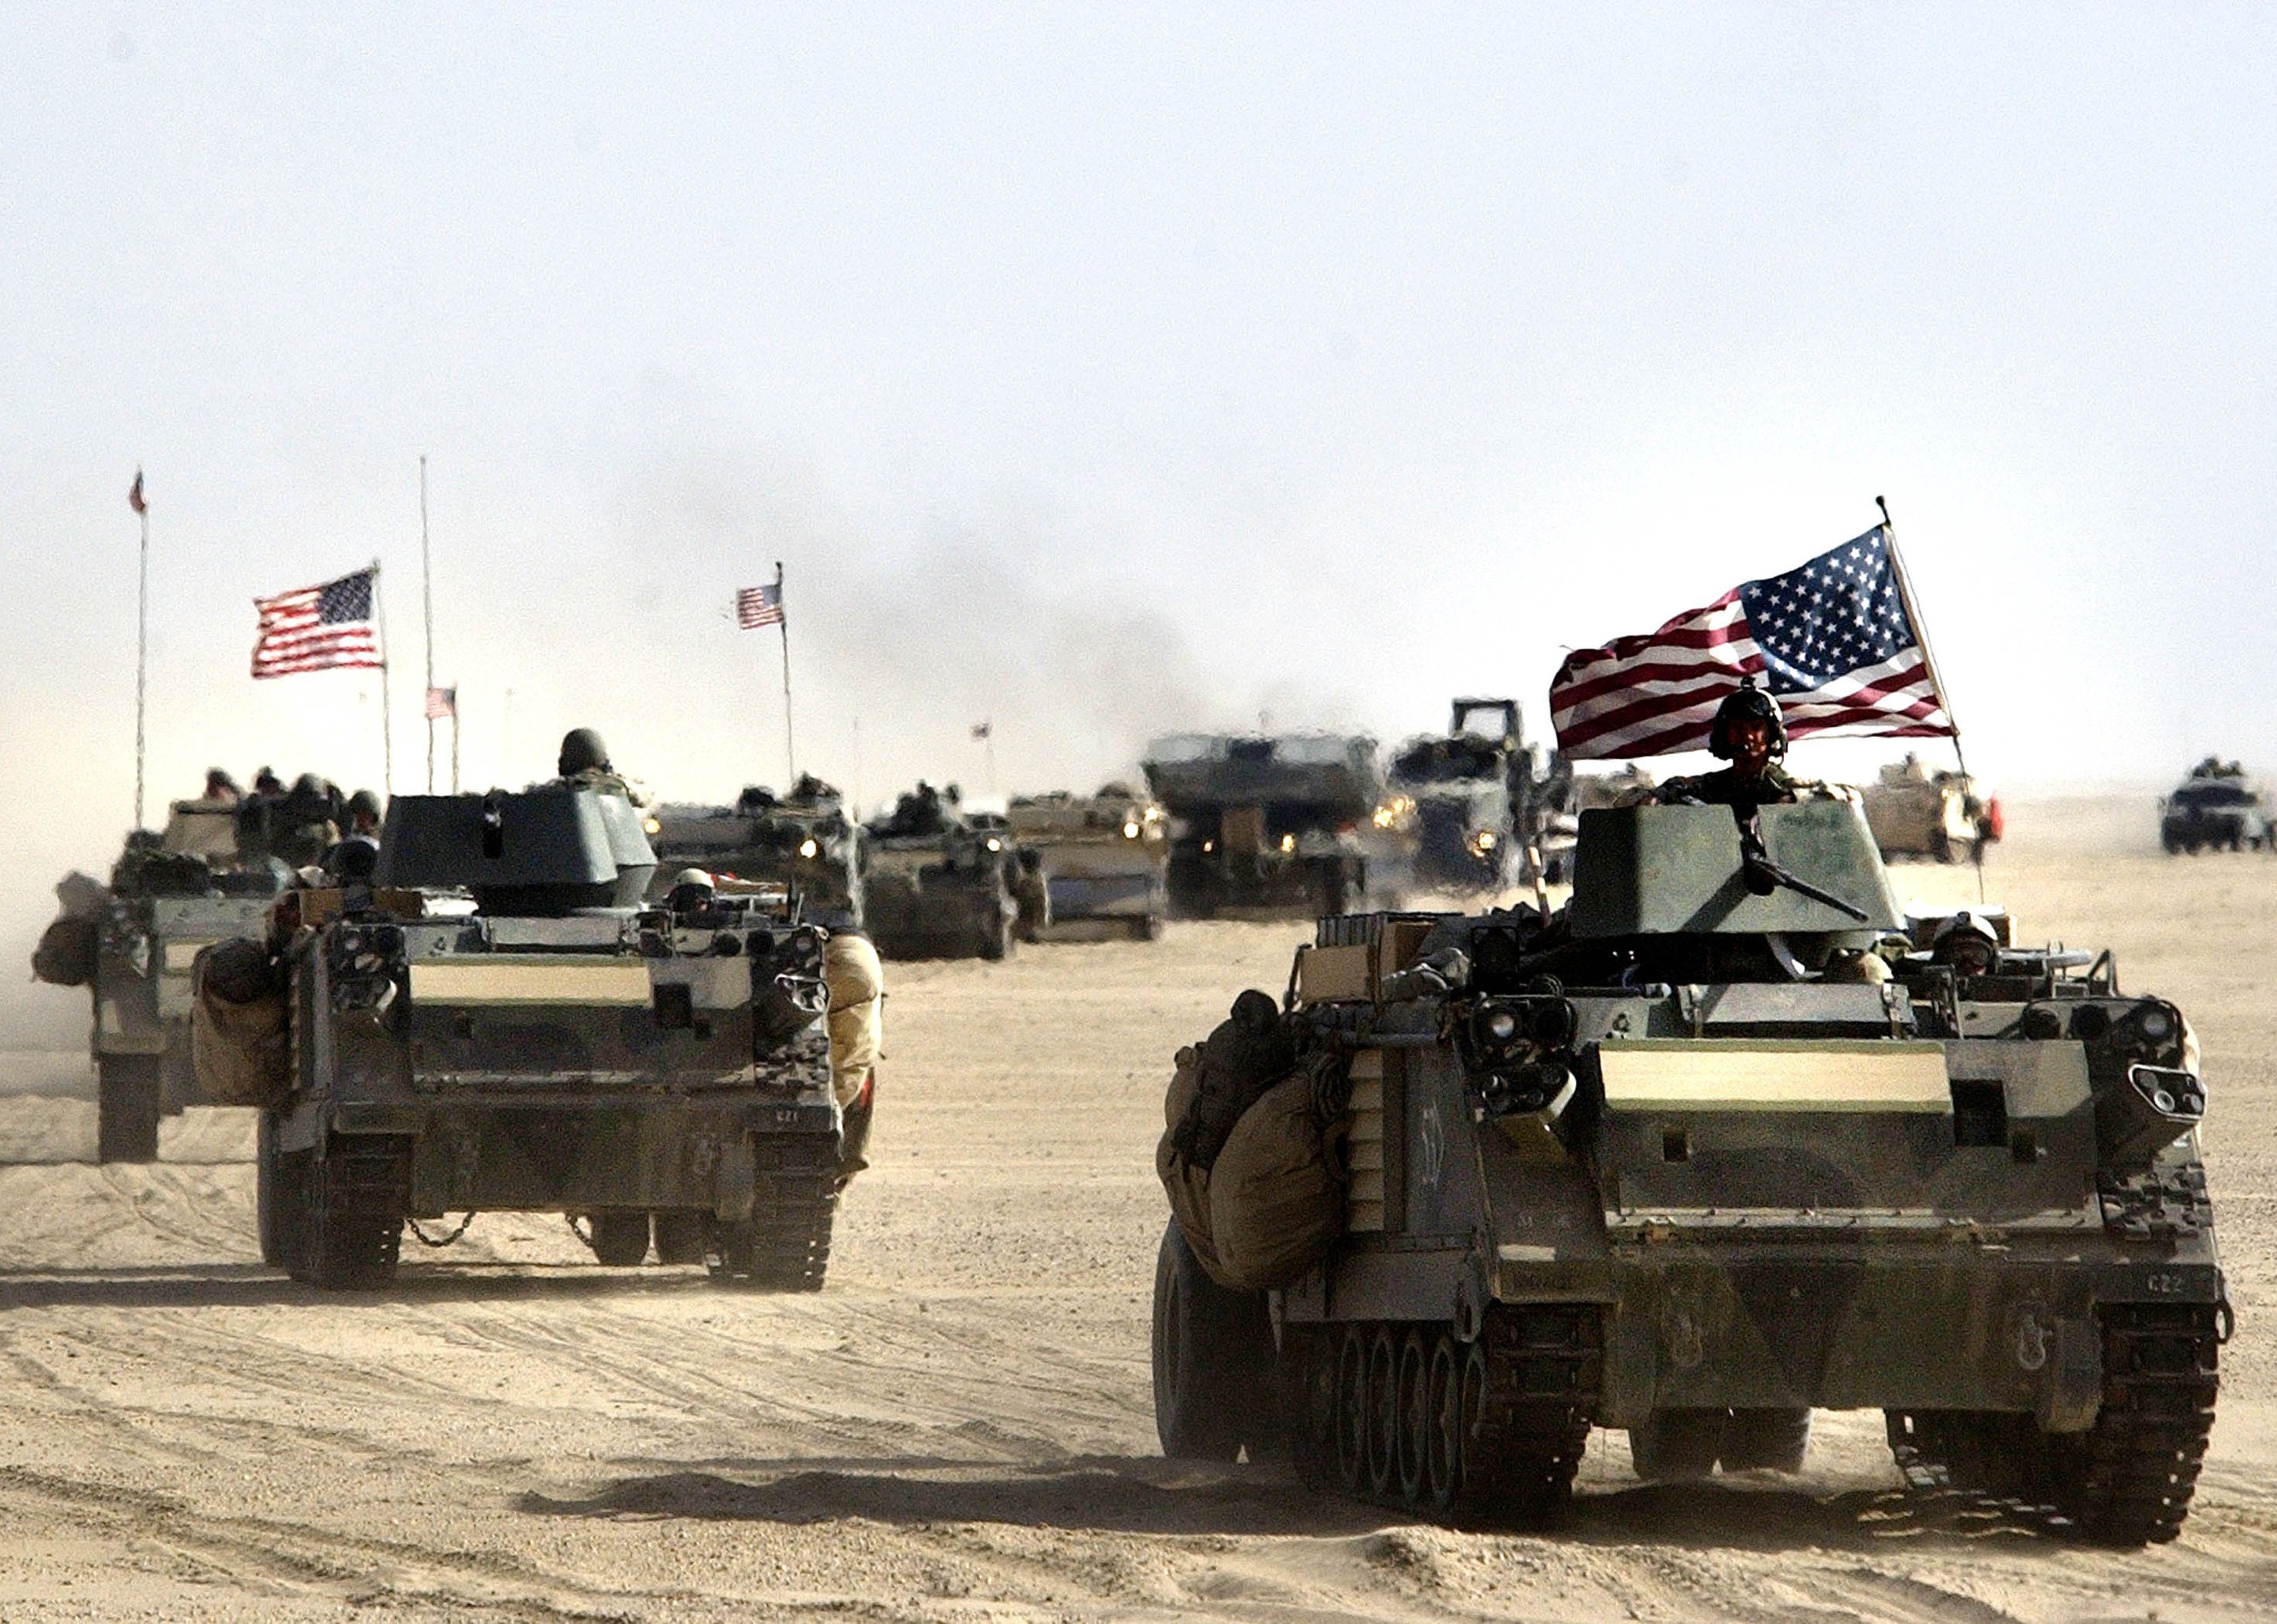 U.S. Army 11th Engineers move into position March 18 ahead of a possible strike near the Kuwait-Iraq border.